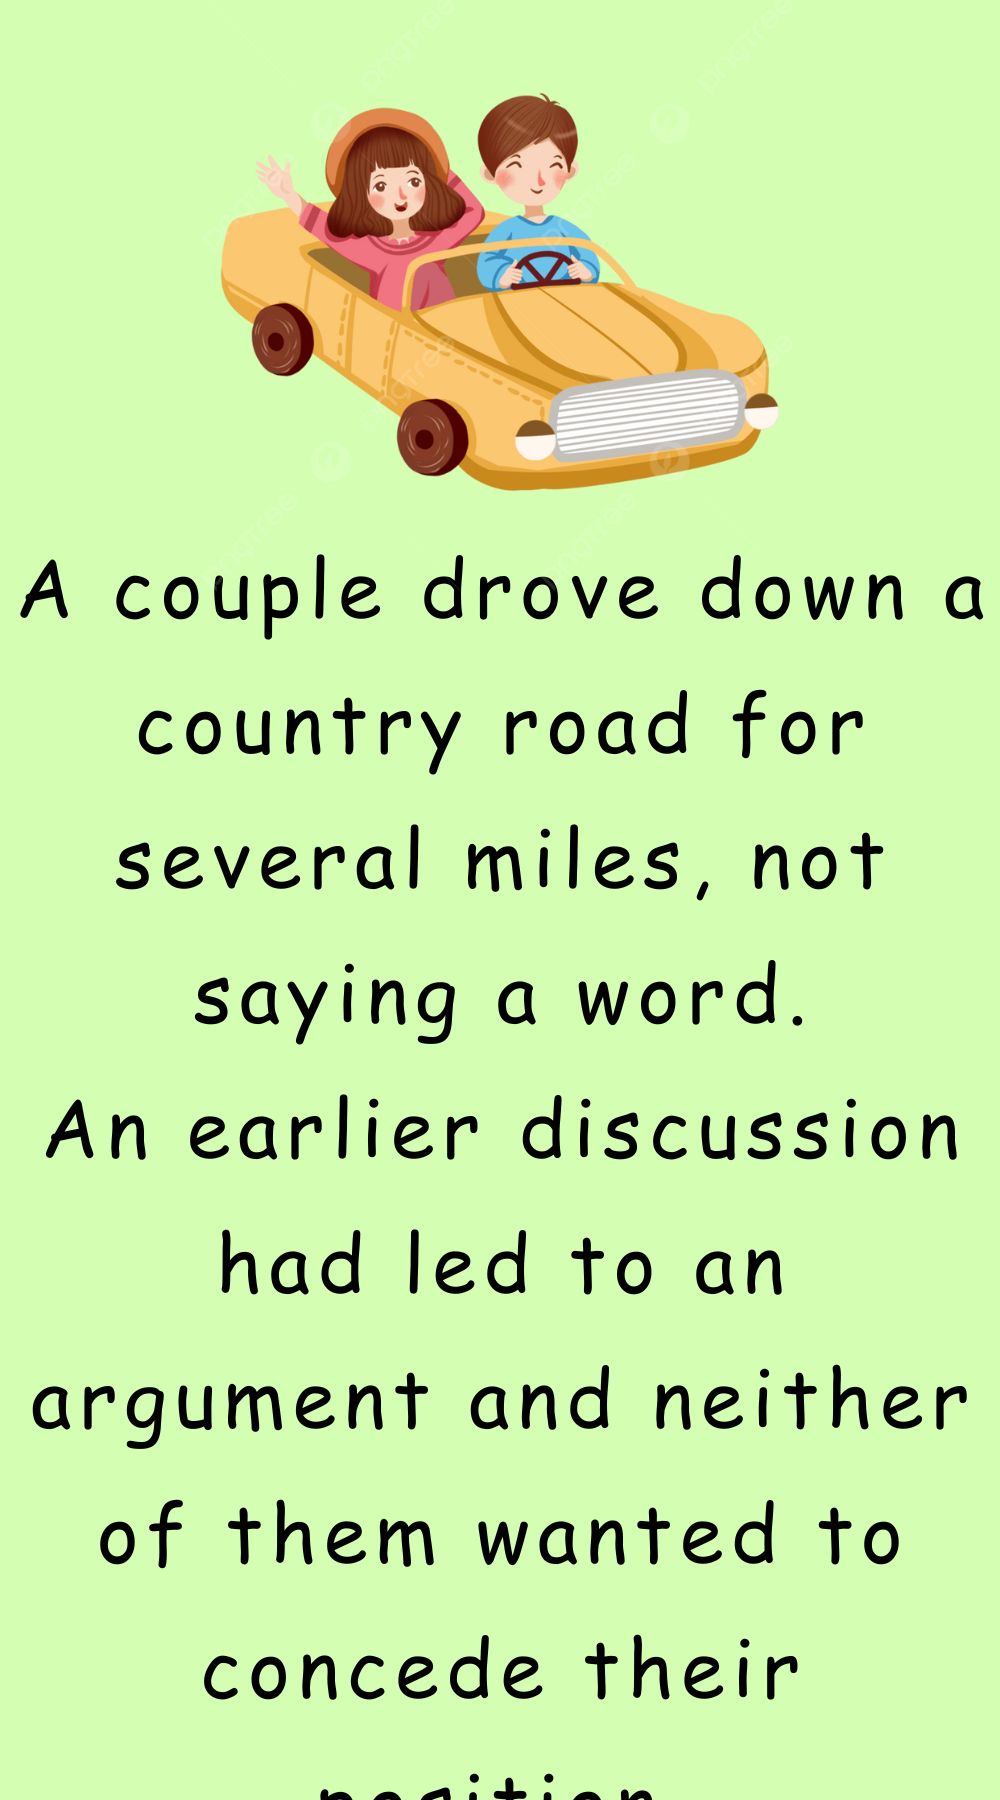 A couple drove down a country road for several miles